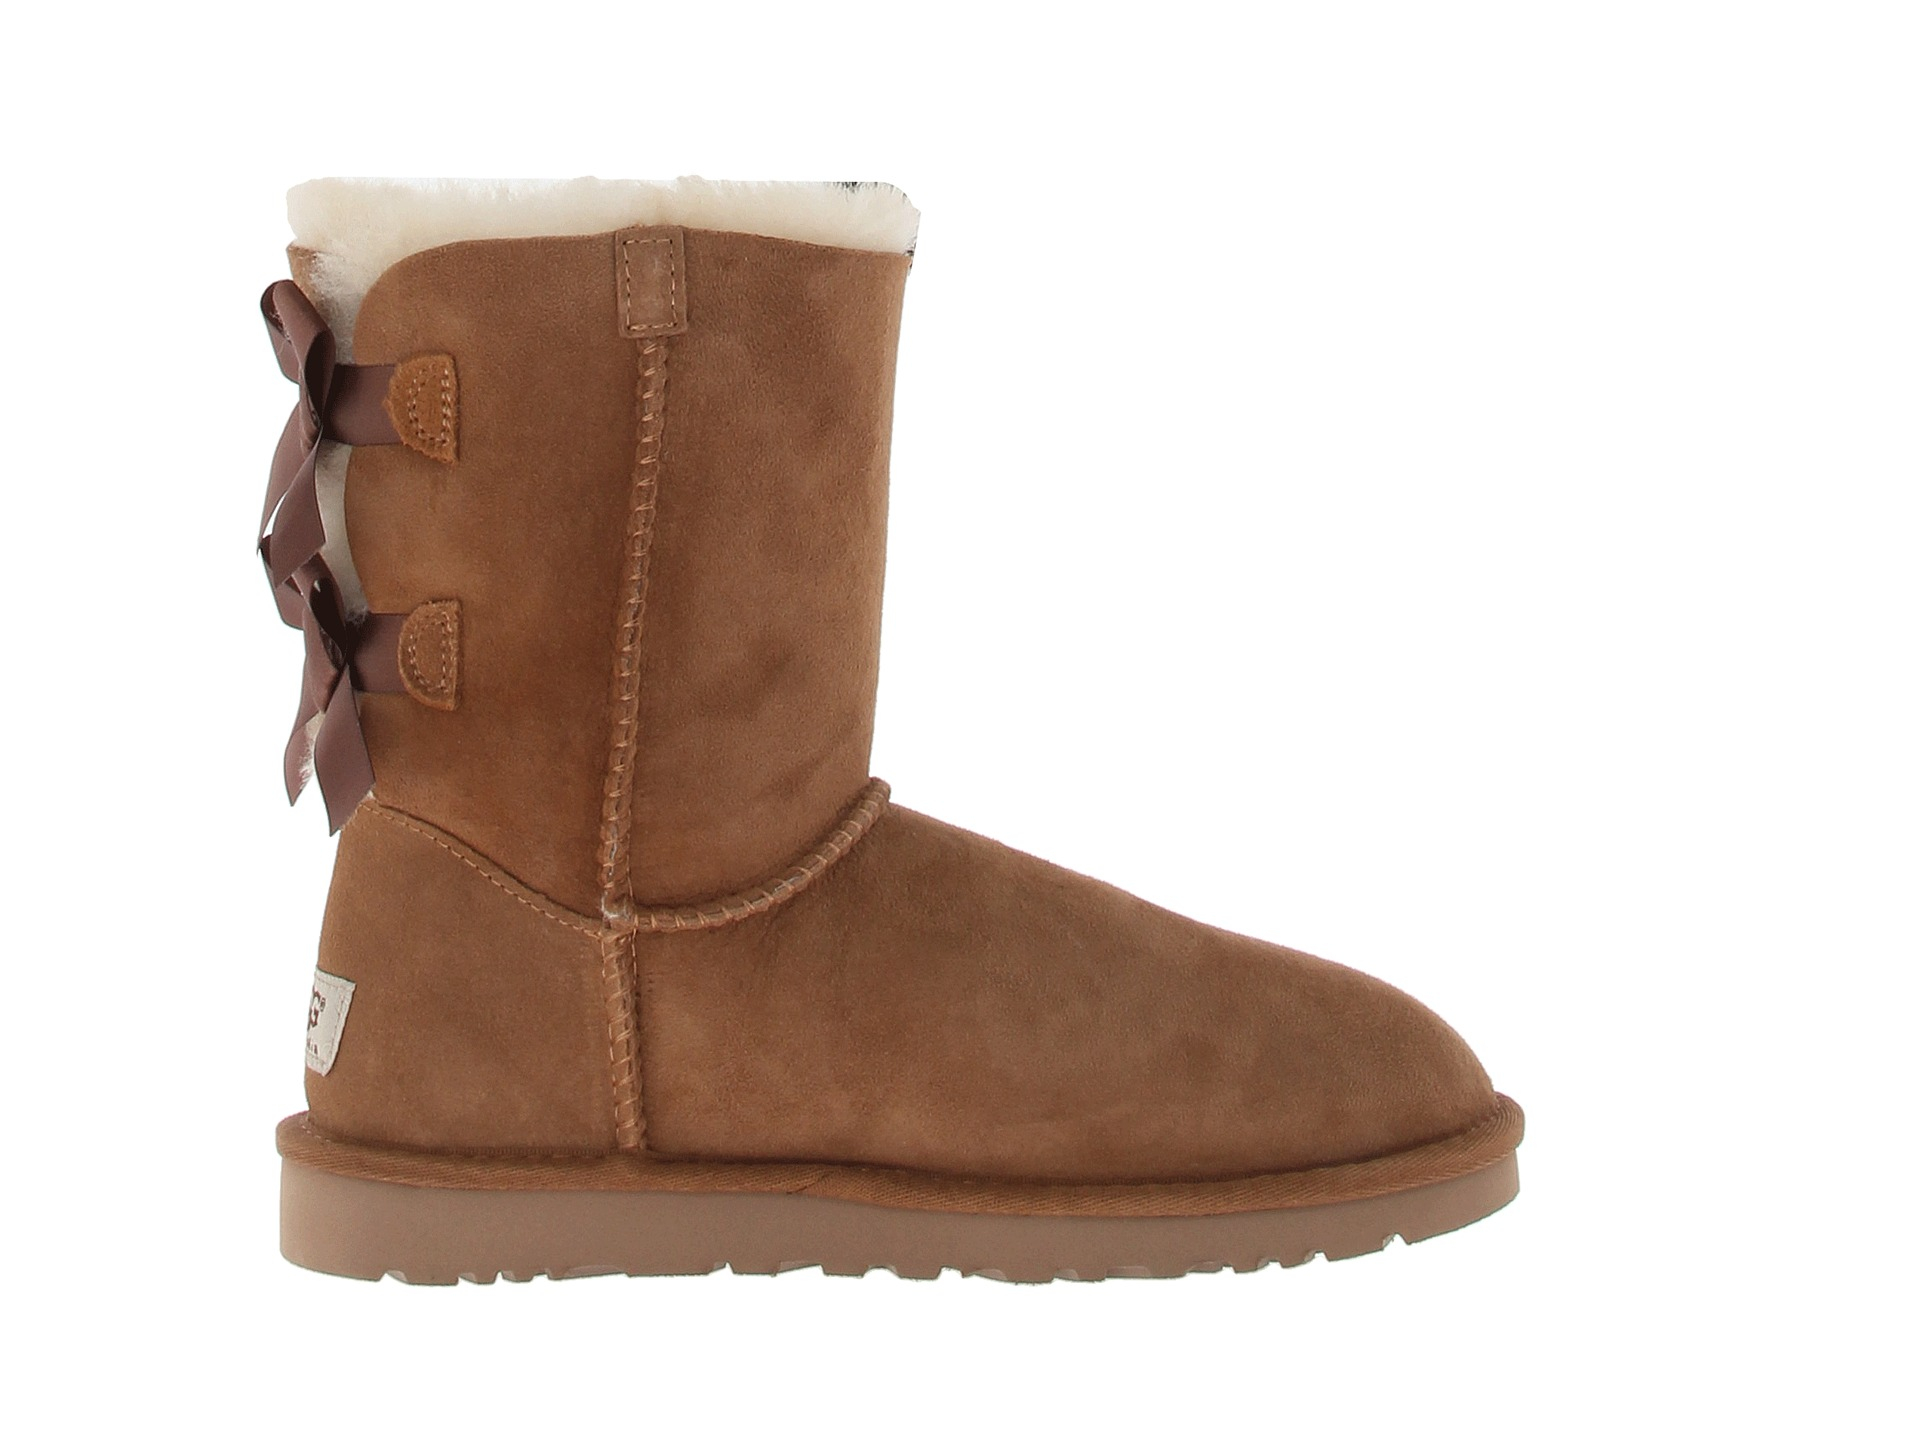 Brown Uggs With Bows In The Back Division Of Global Affairs.